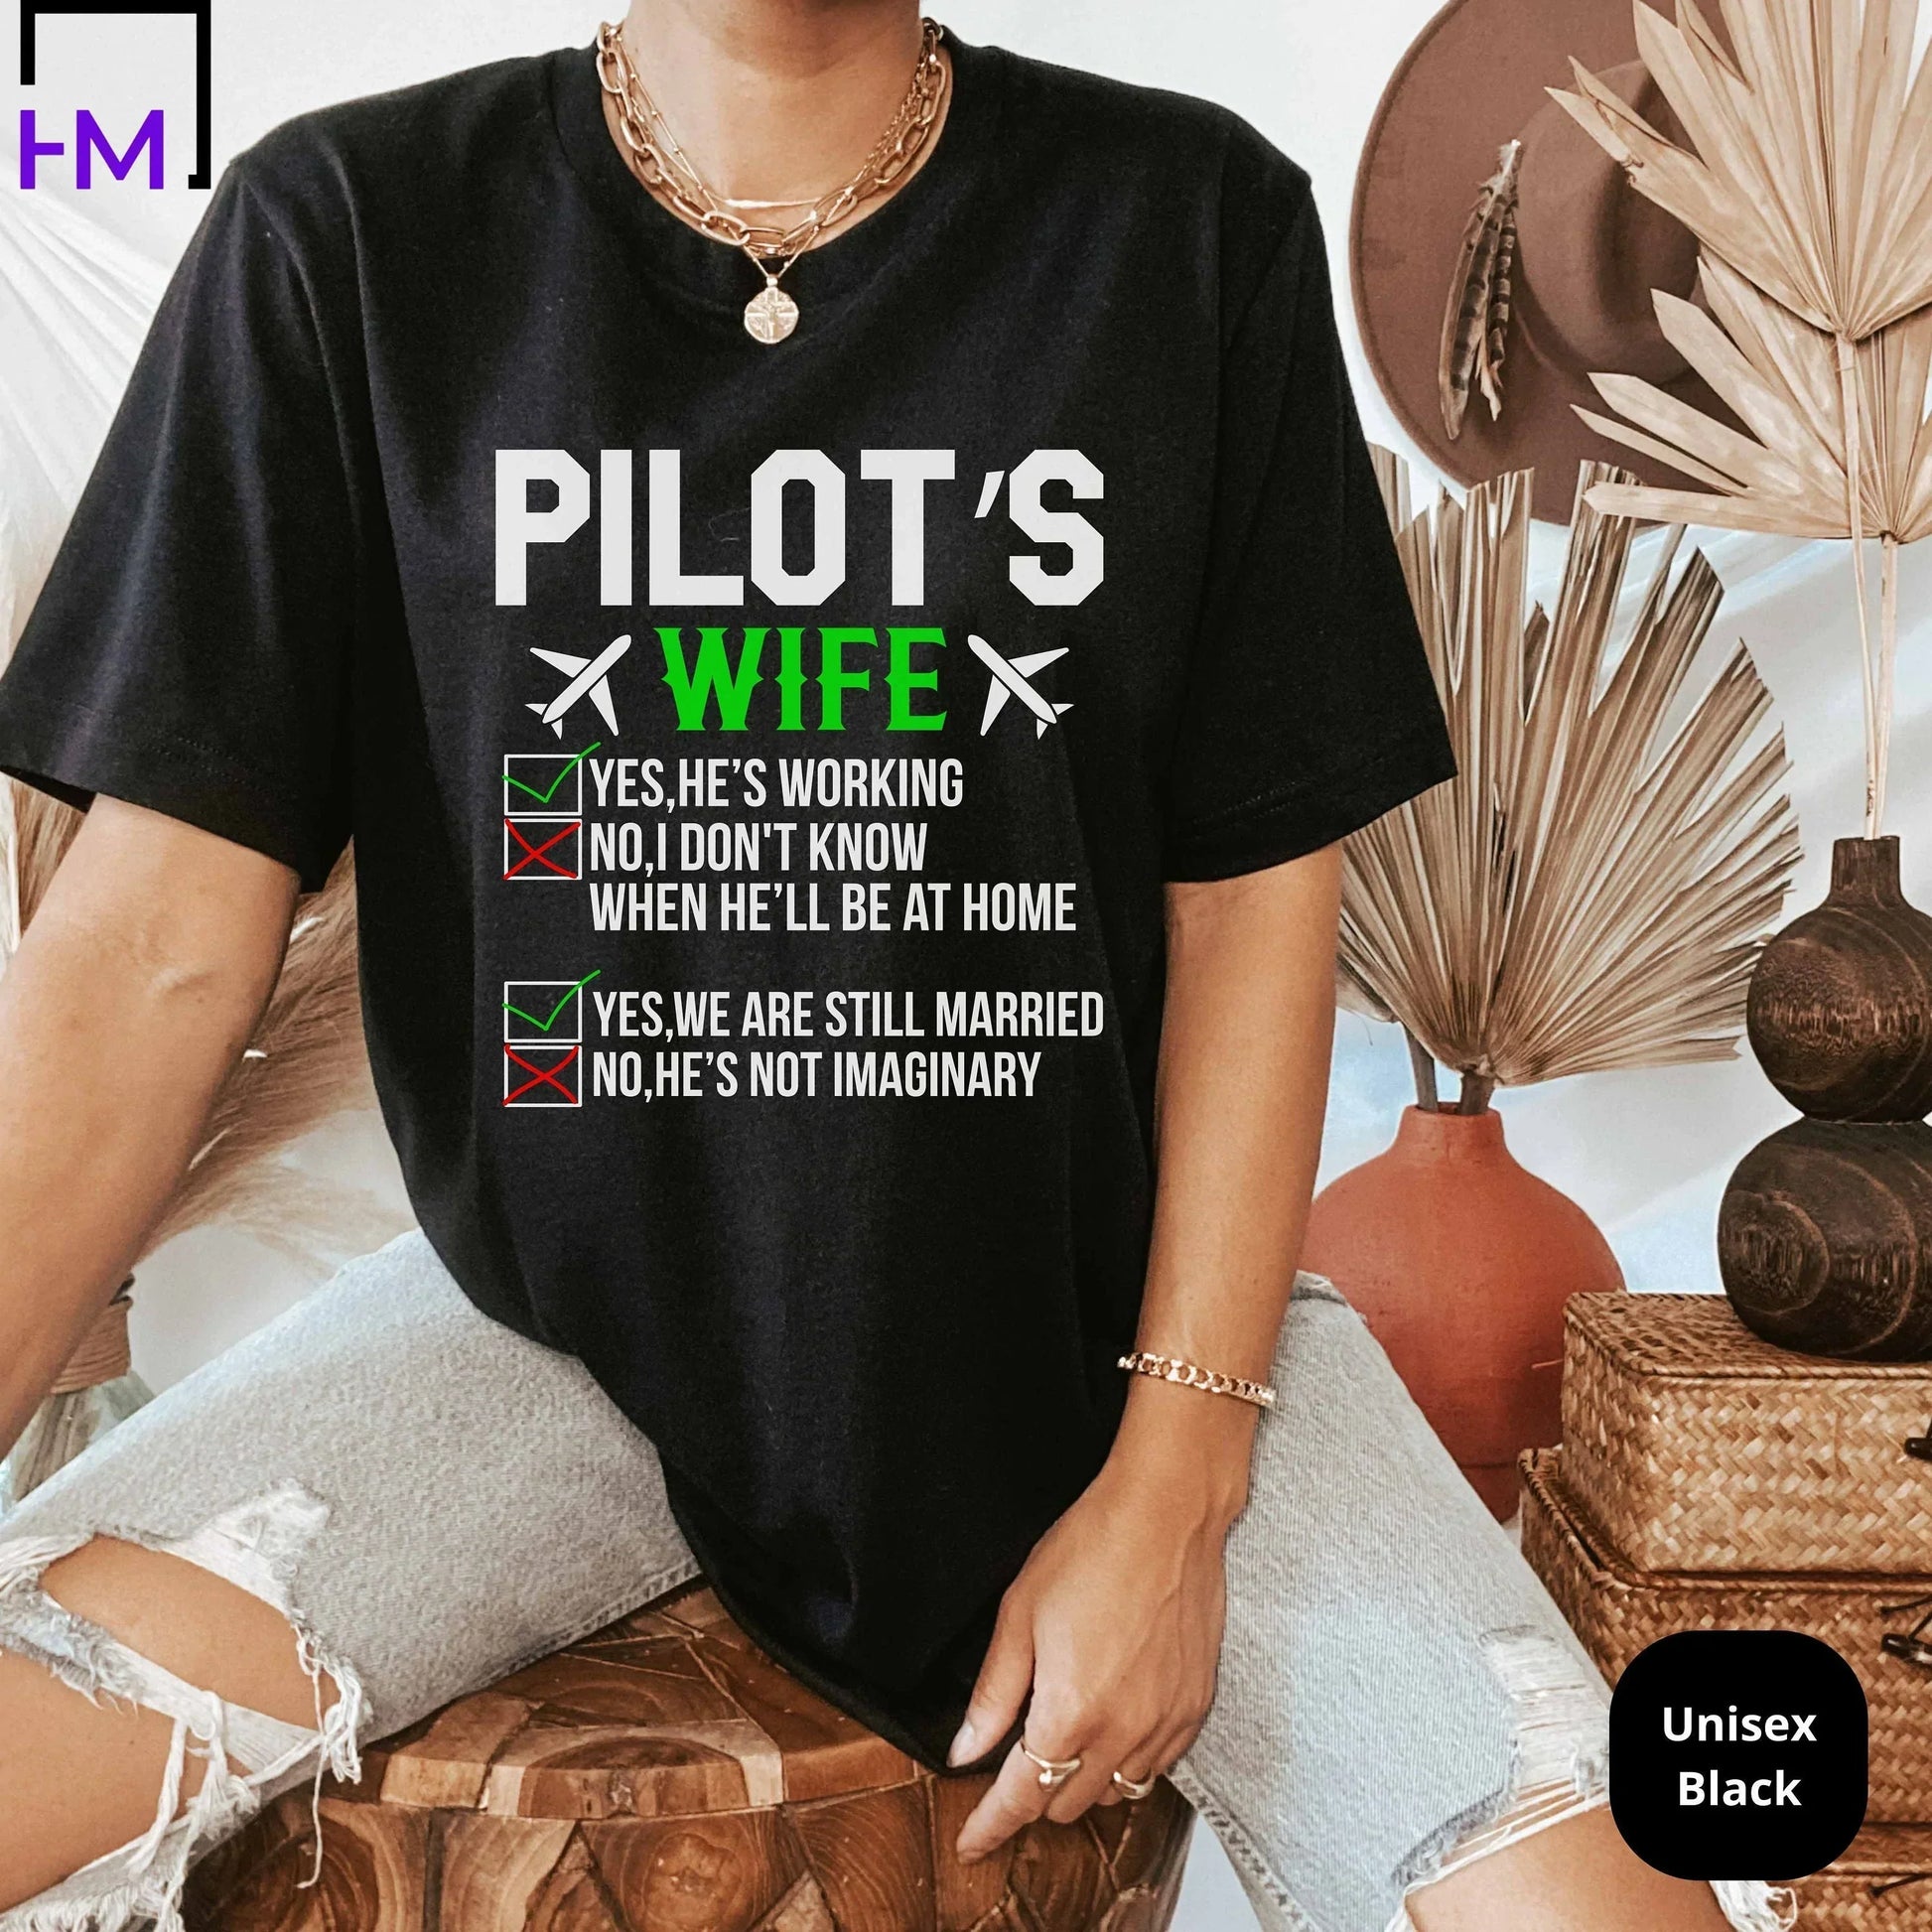 Funny Pilots Wife Shirt, Gift for Wife, Workaholic Gift for Pilot's Wife, Frequent Flyer, Traveler Adventurer Airplane Lover Shirt, Aviation HMDesignStudioUS